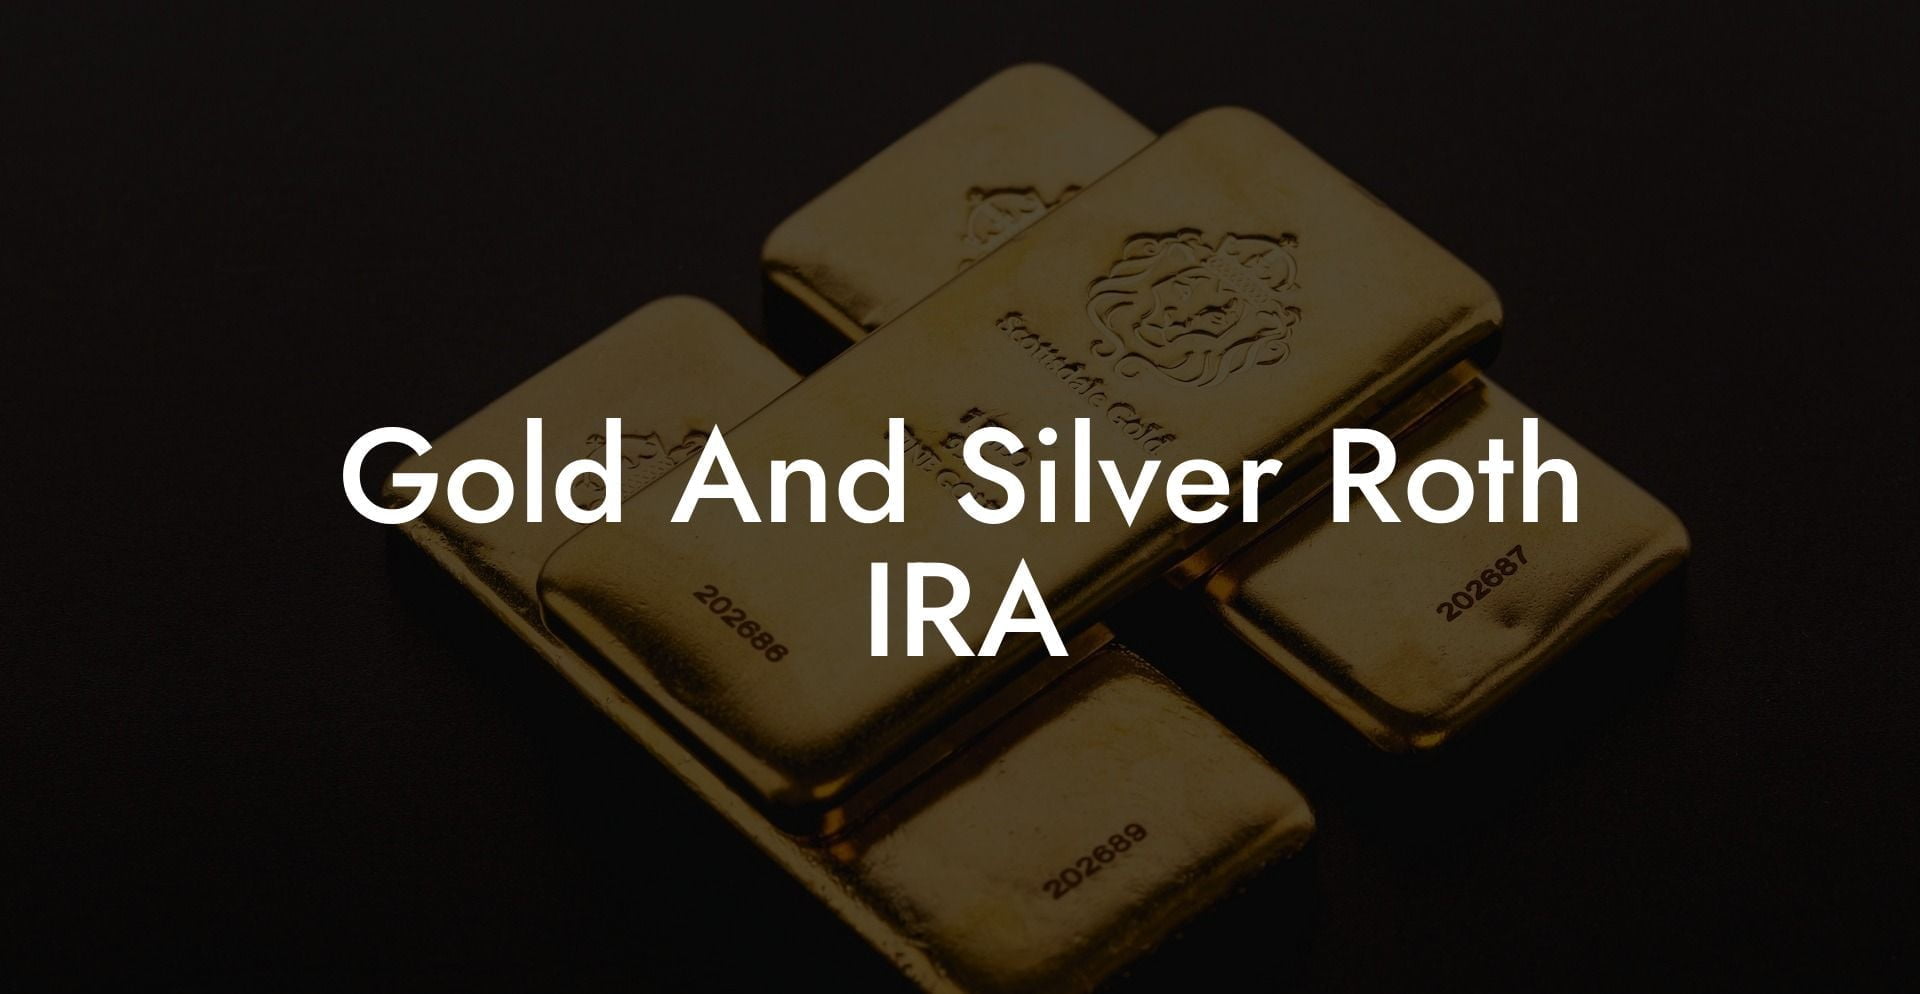 Gold And Silver Roth IRA